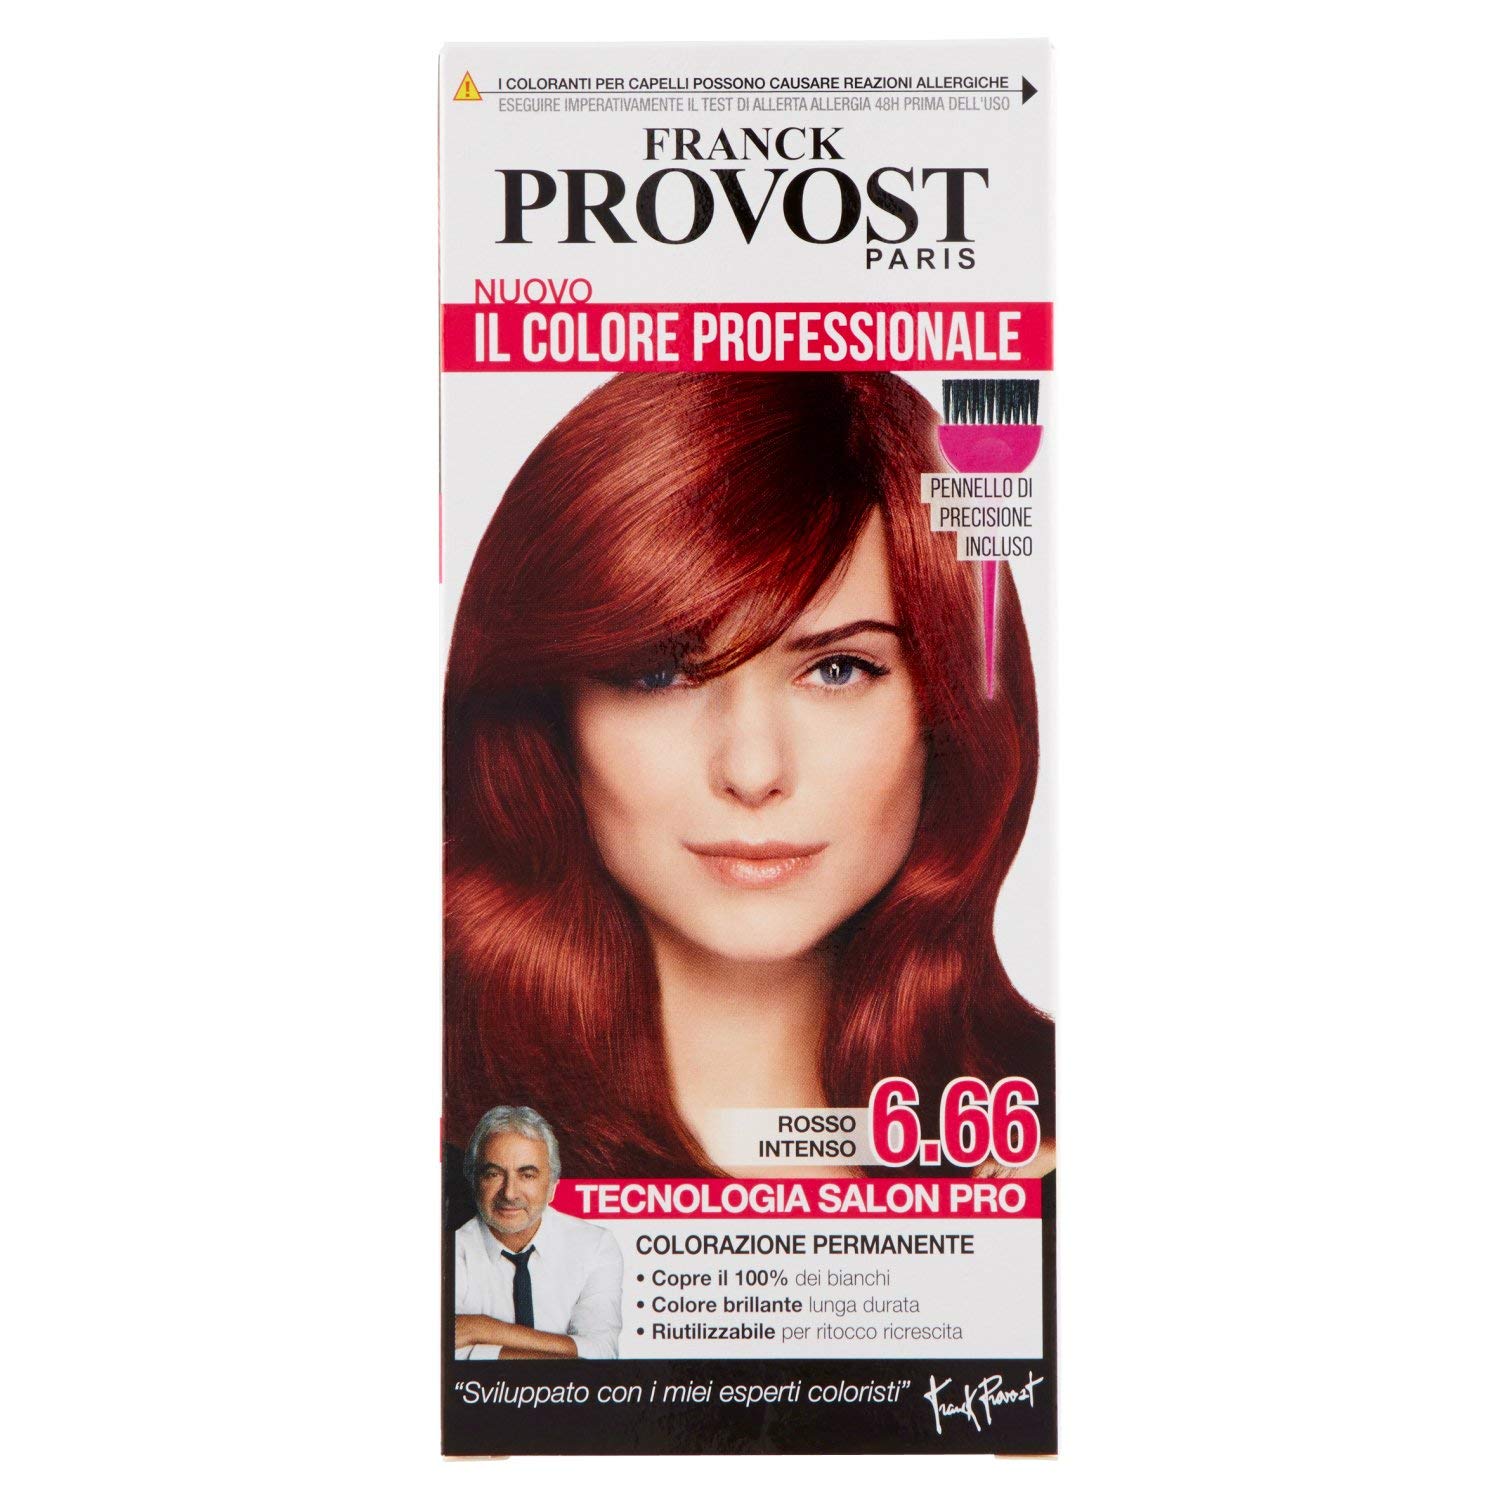 Franck Provost Professional Hair Color Reflective and Shine Intense Red